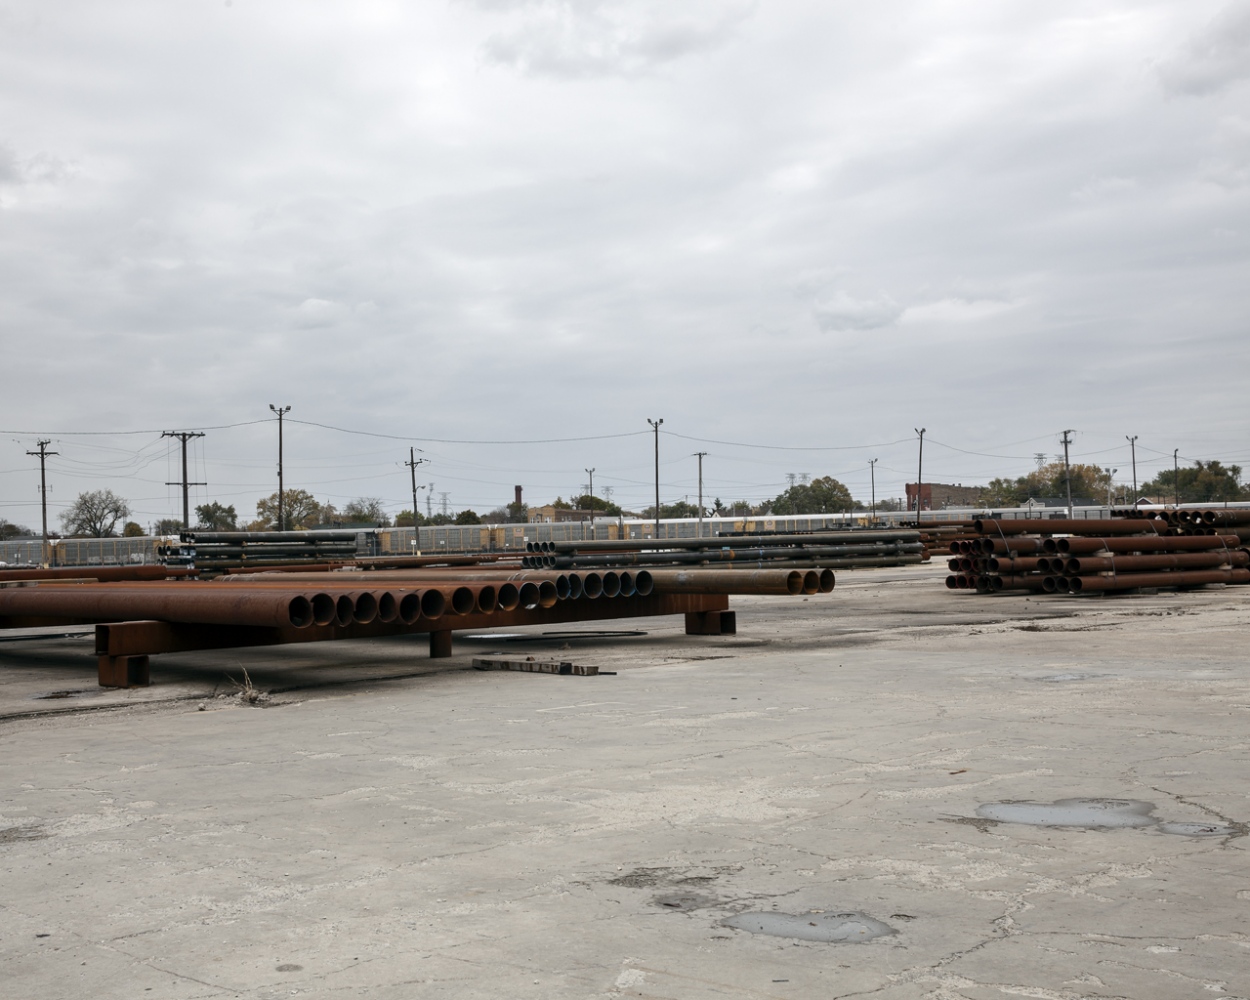 Warehouses - Steel Pipe (GLR), Chicago, IL  2012